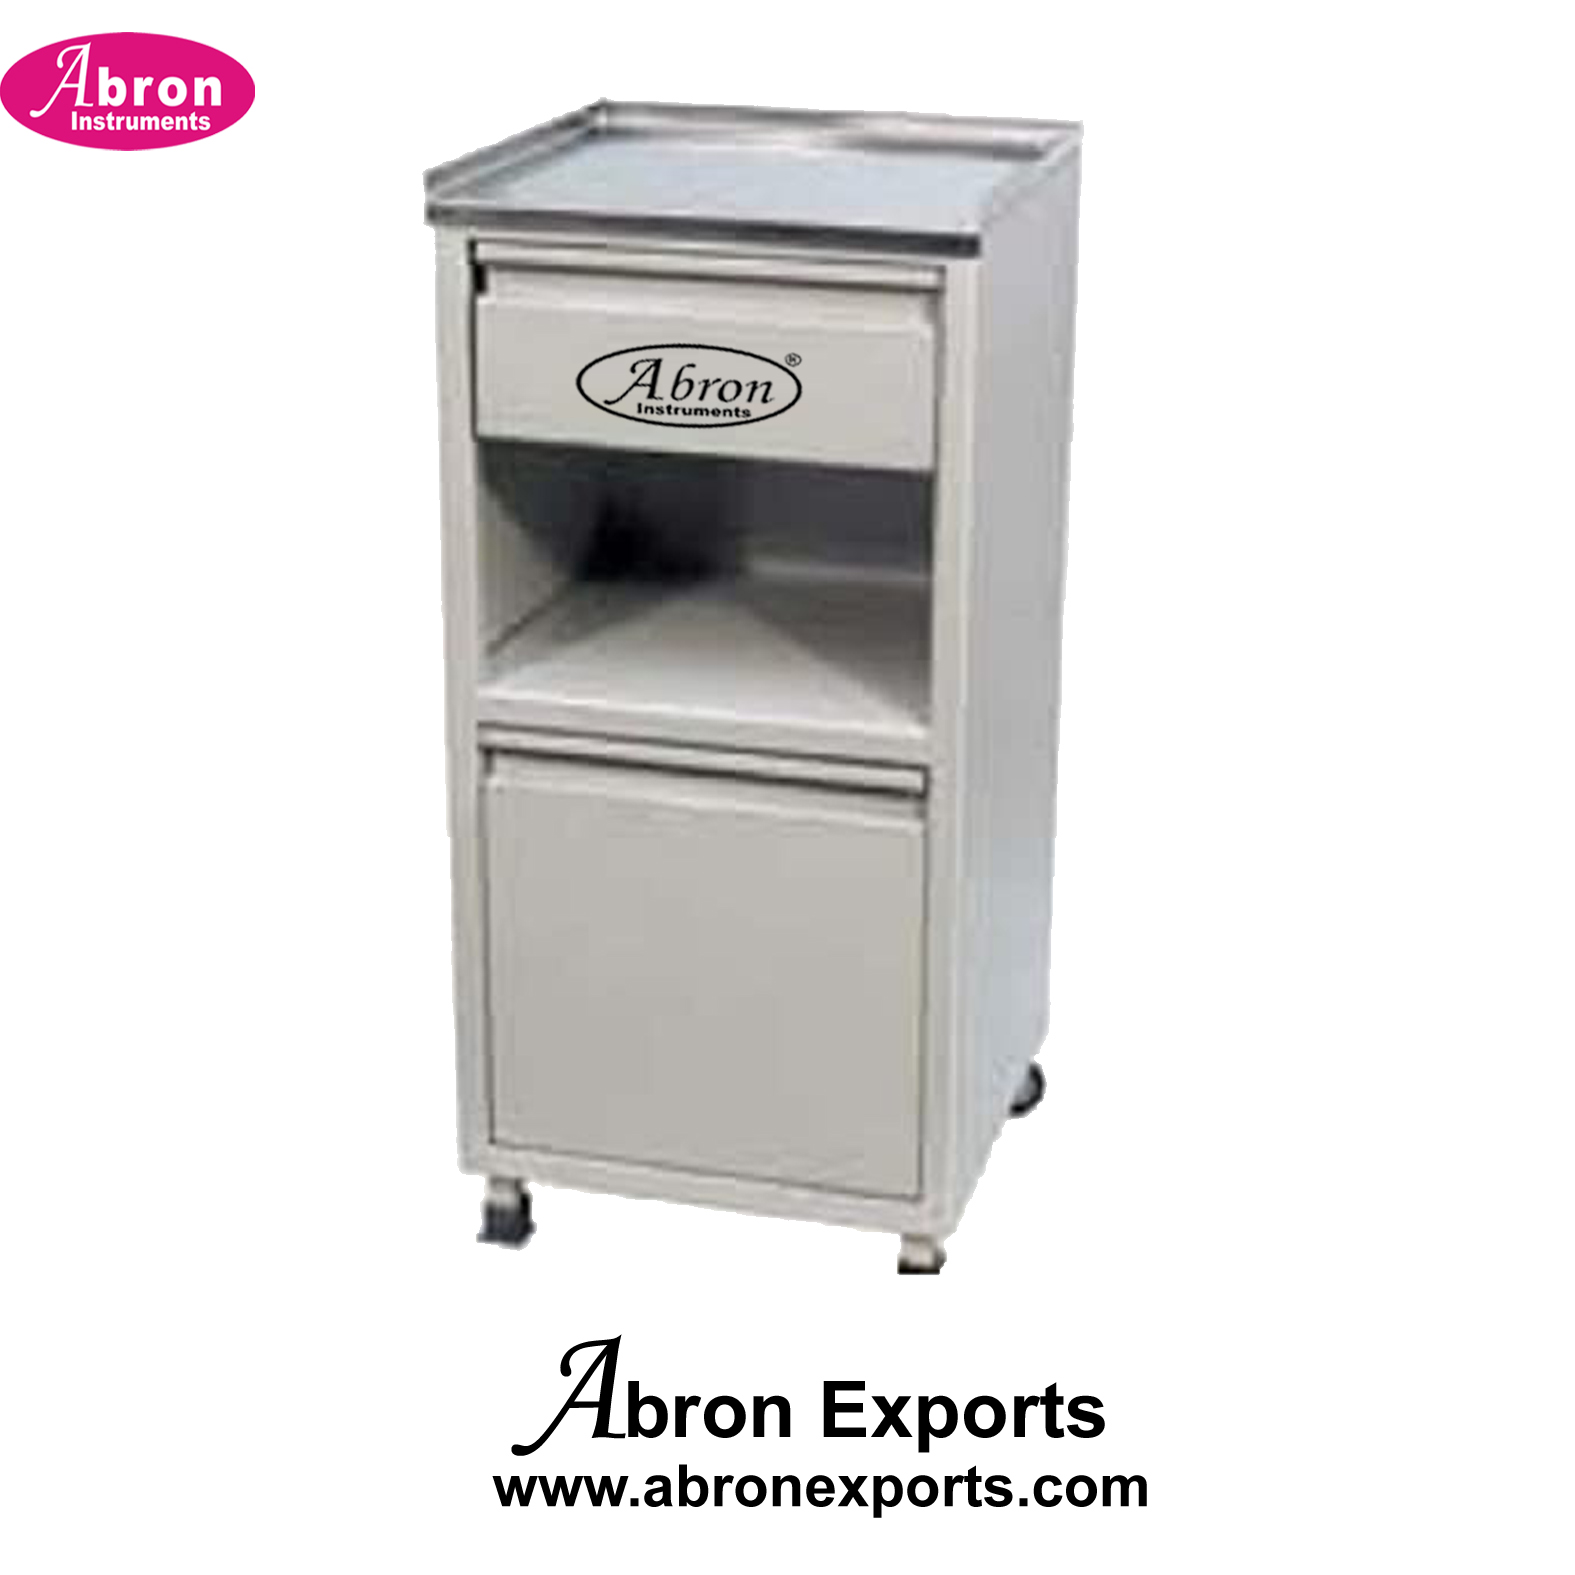 Hospital Bed side locker Stainless steel top metallic with wheels Nursing Room Abron ABM-2354PS 